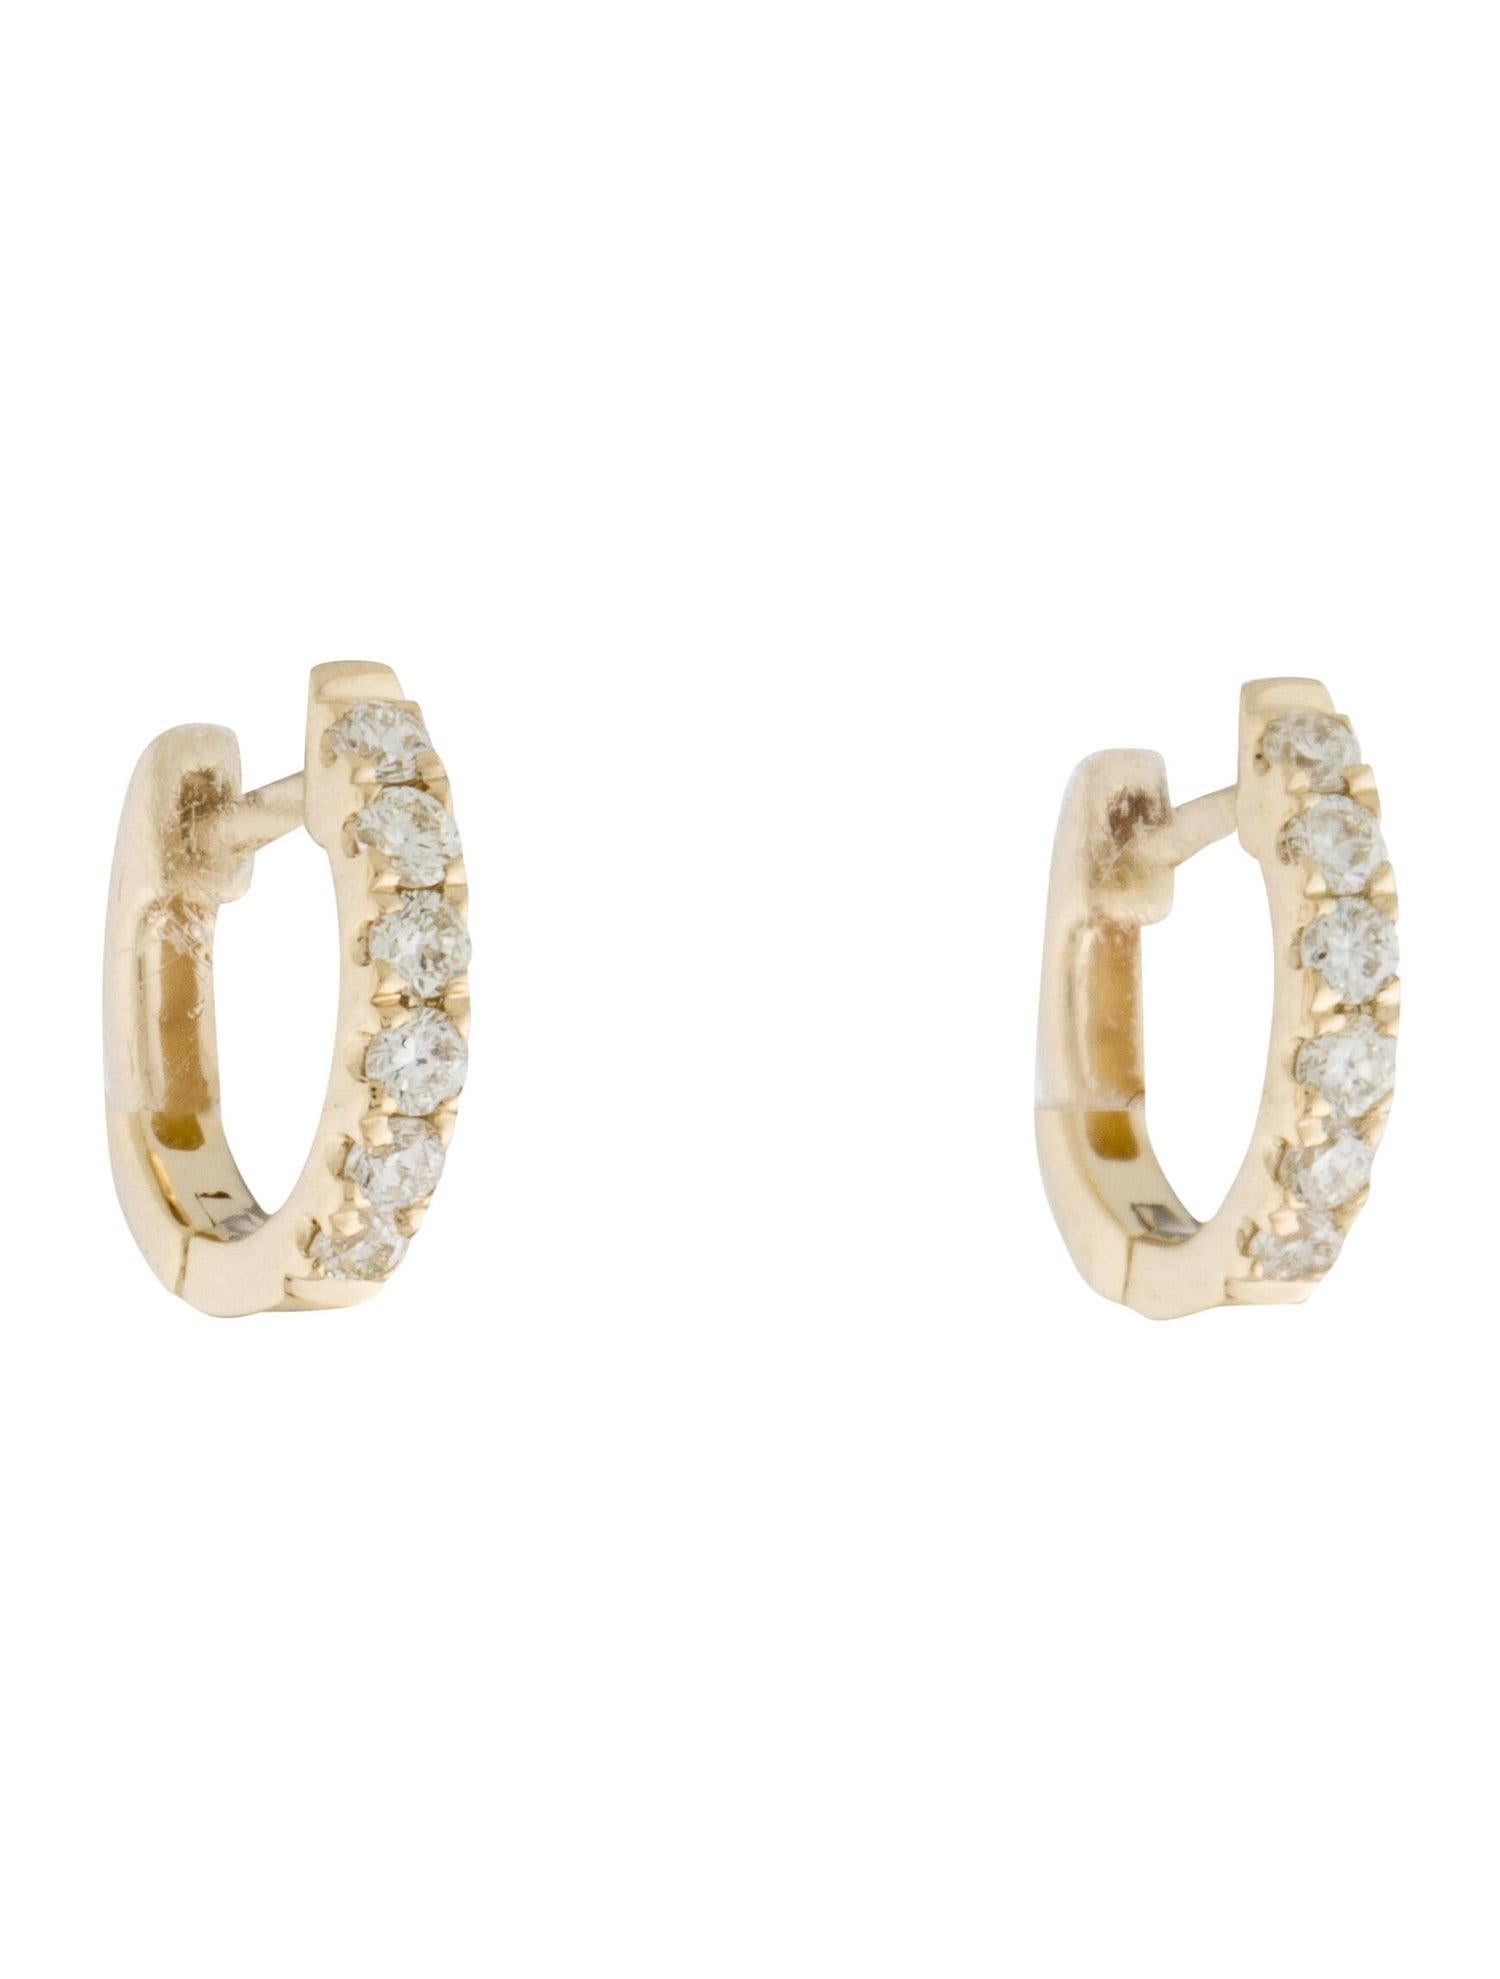 14 Karat Yellow Gold 0.18 Carat Diamond Huggie Hoop Earring In New Condition For Sale In Great neck, NY